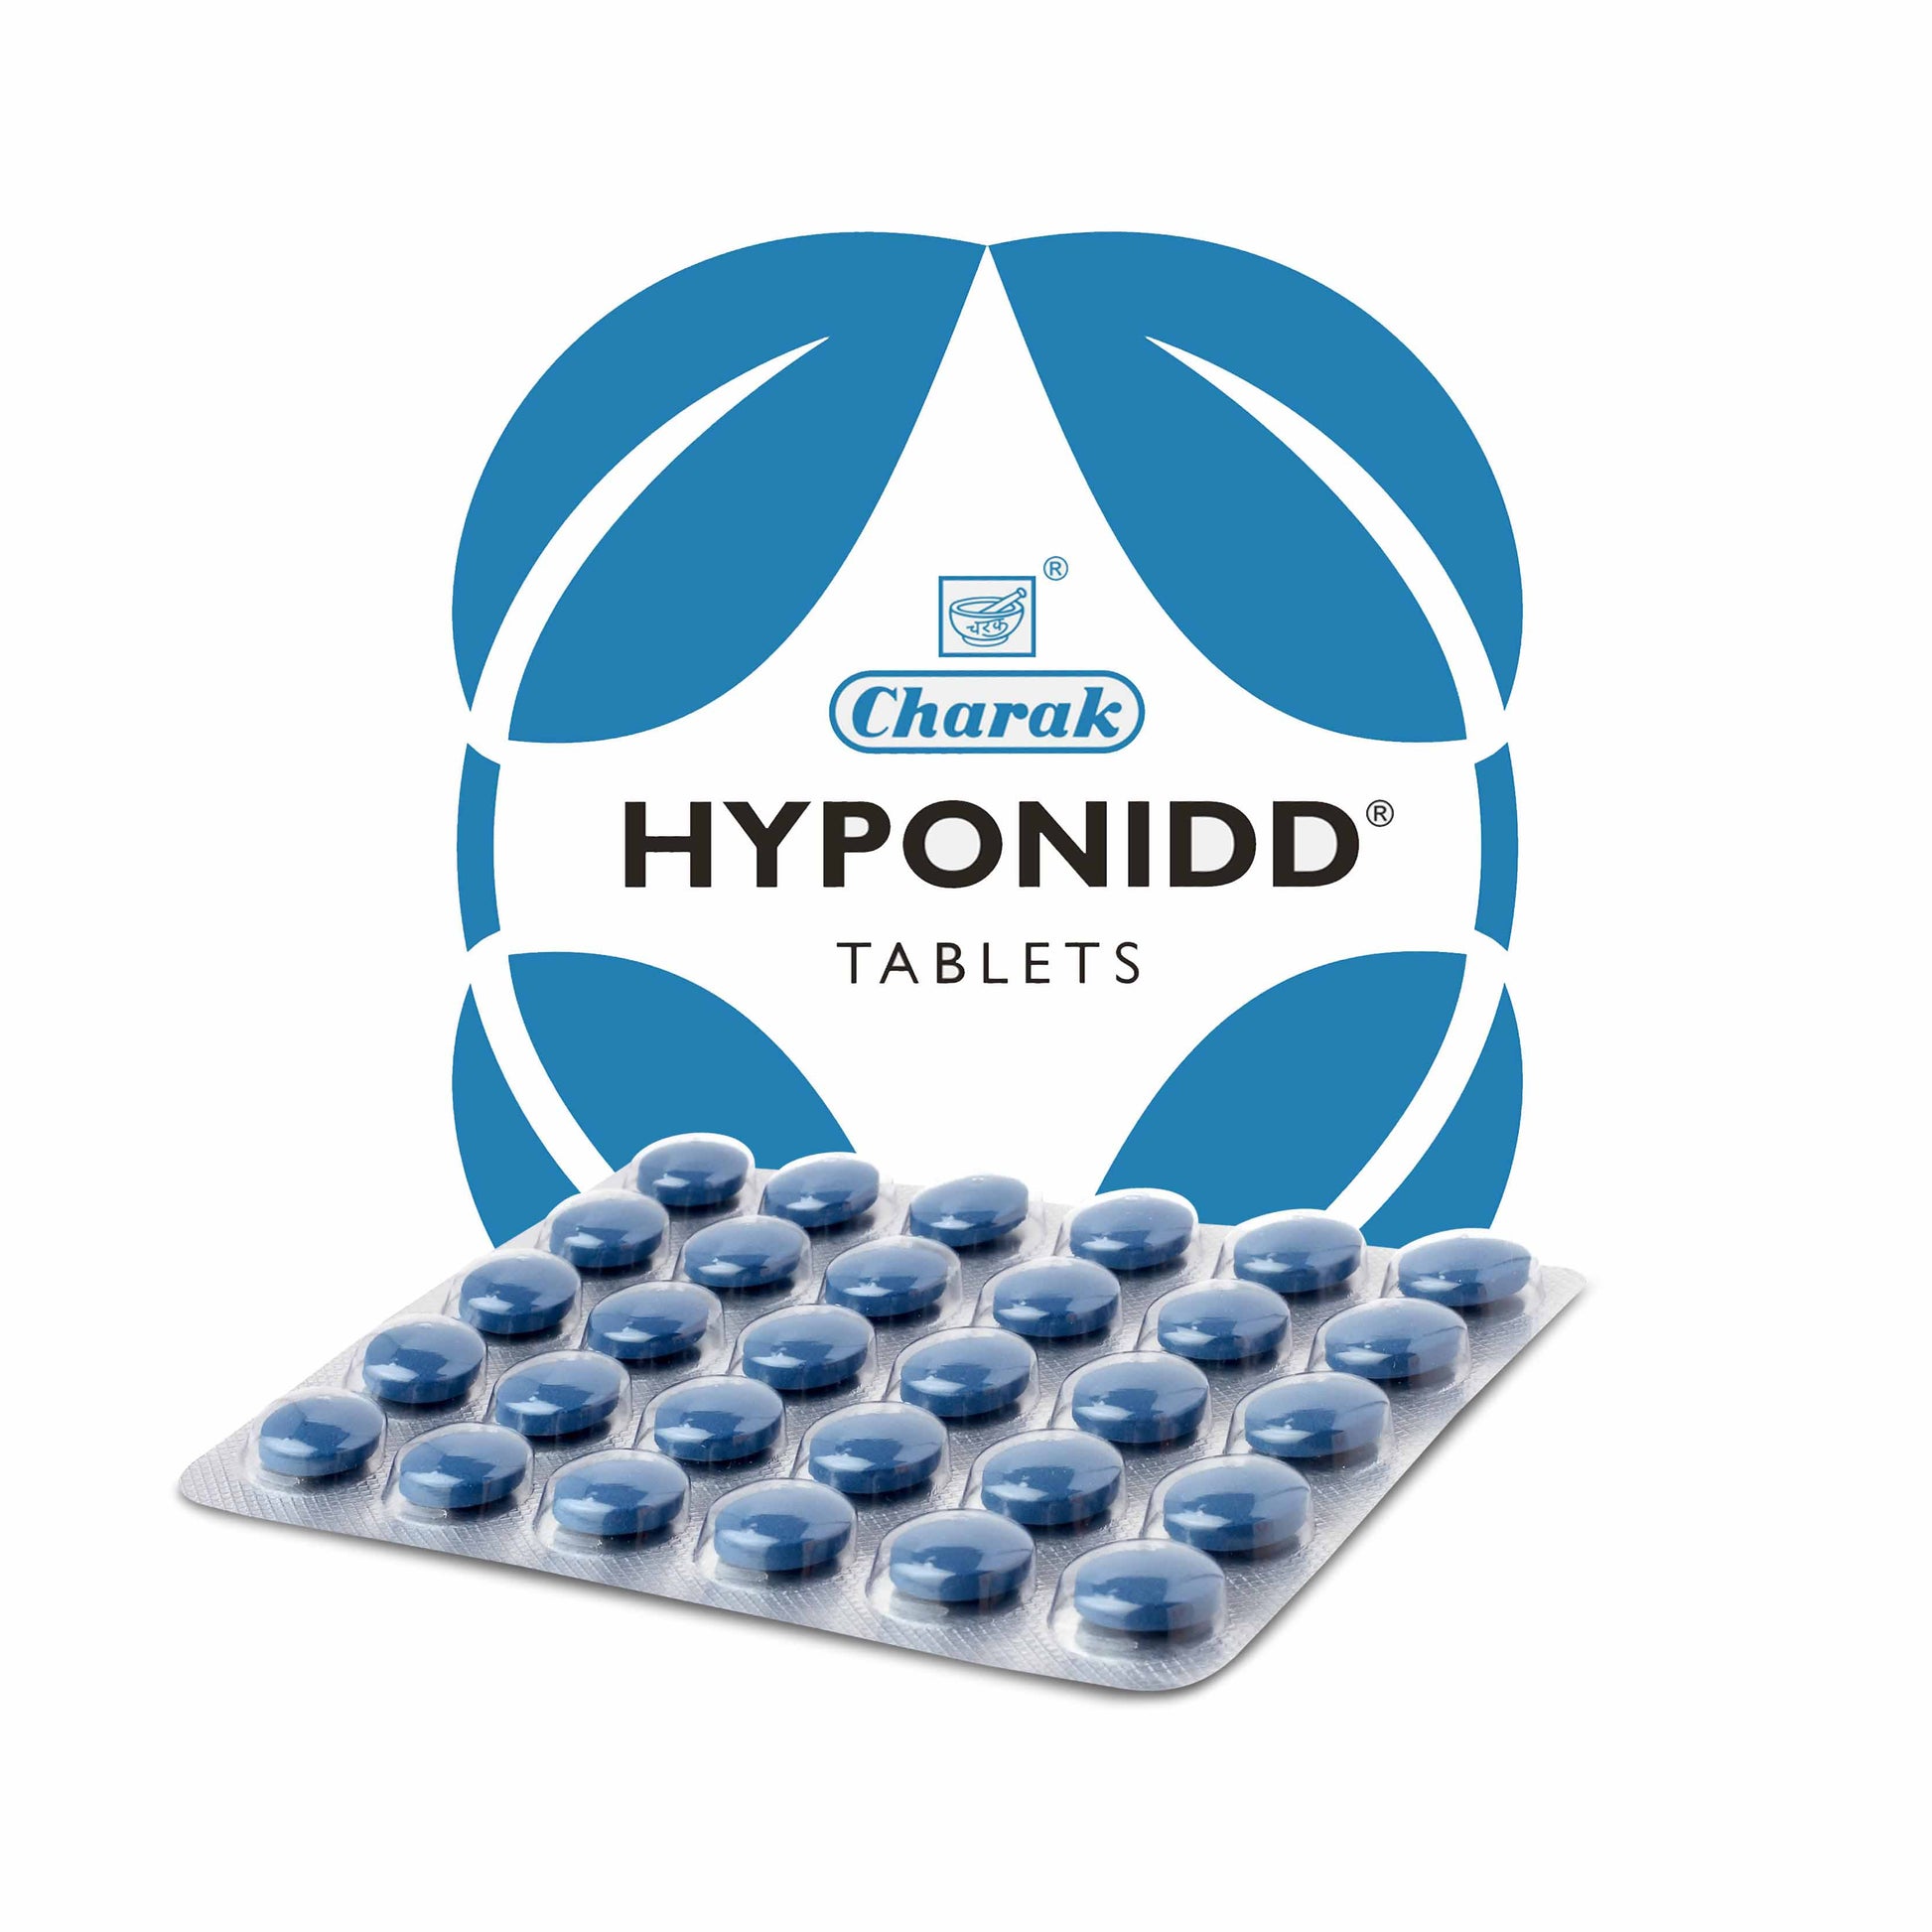 Shop Hyponidd 30Tablets at price 118.00 from Charak Online - Ayush Care